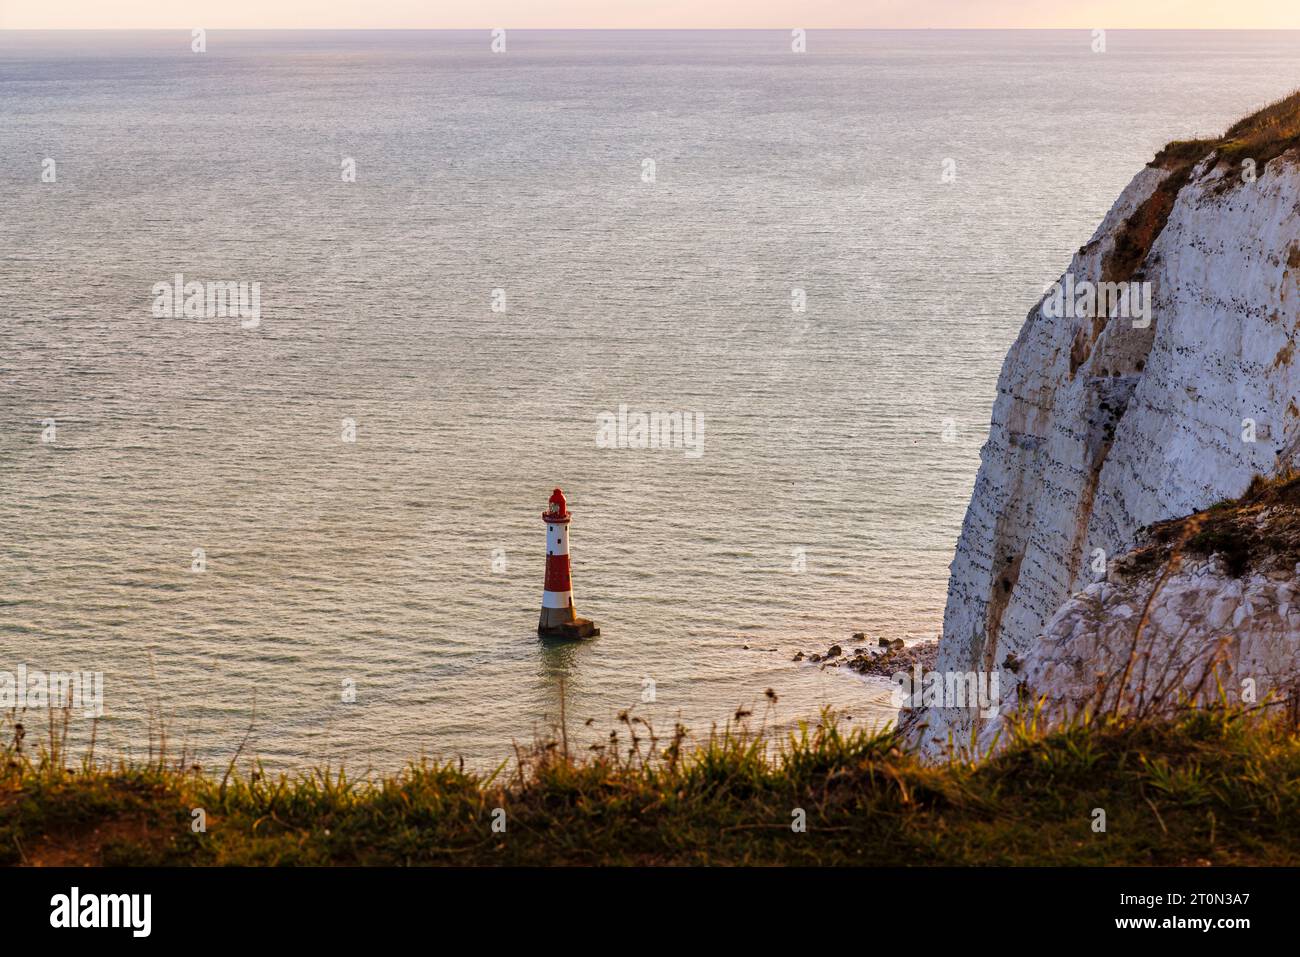 Beachy Head Lighthouse, a rock tower style lighthouse located in the English Channel below the cliffs of Beachy Head in East Sussex, southern England Stock Photo